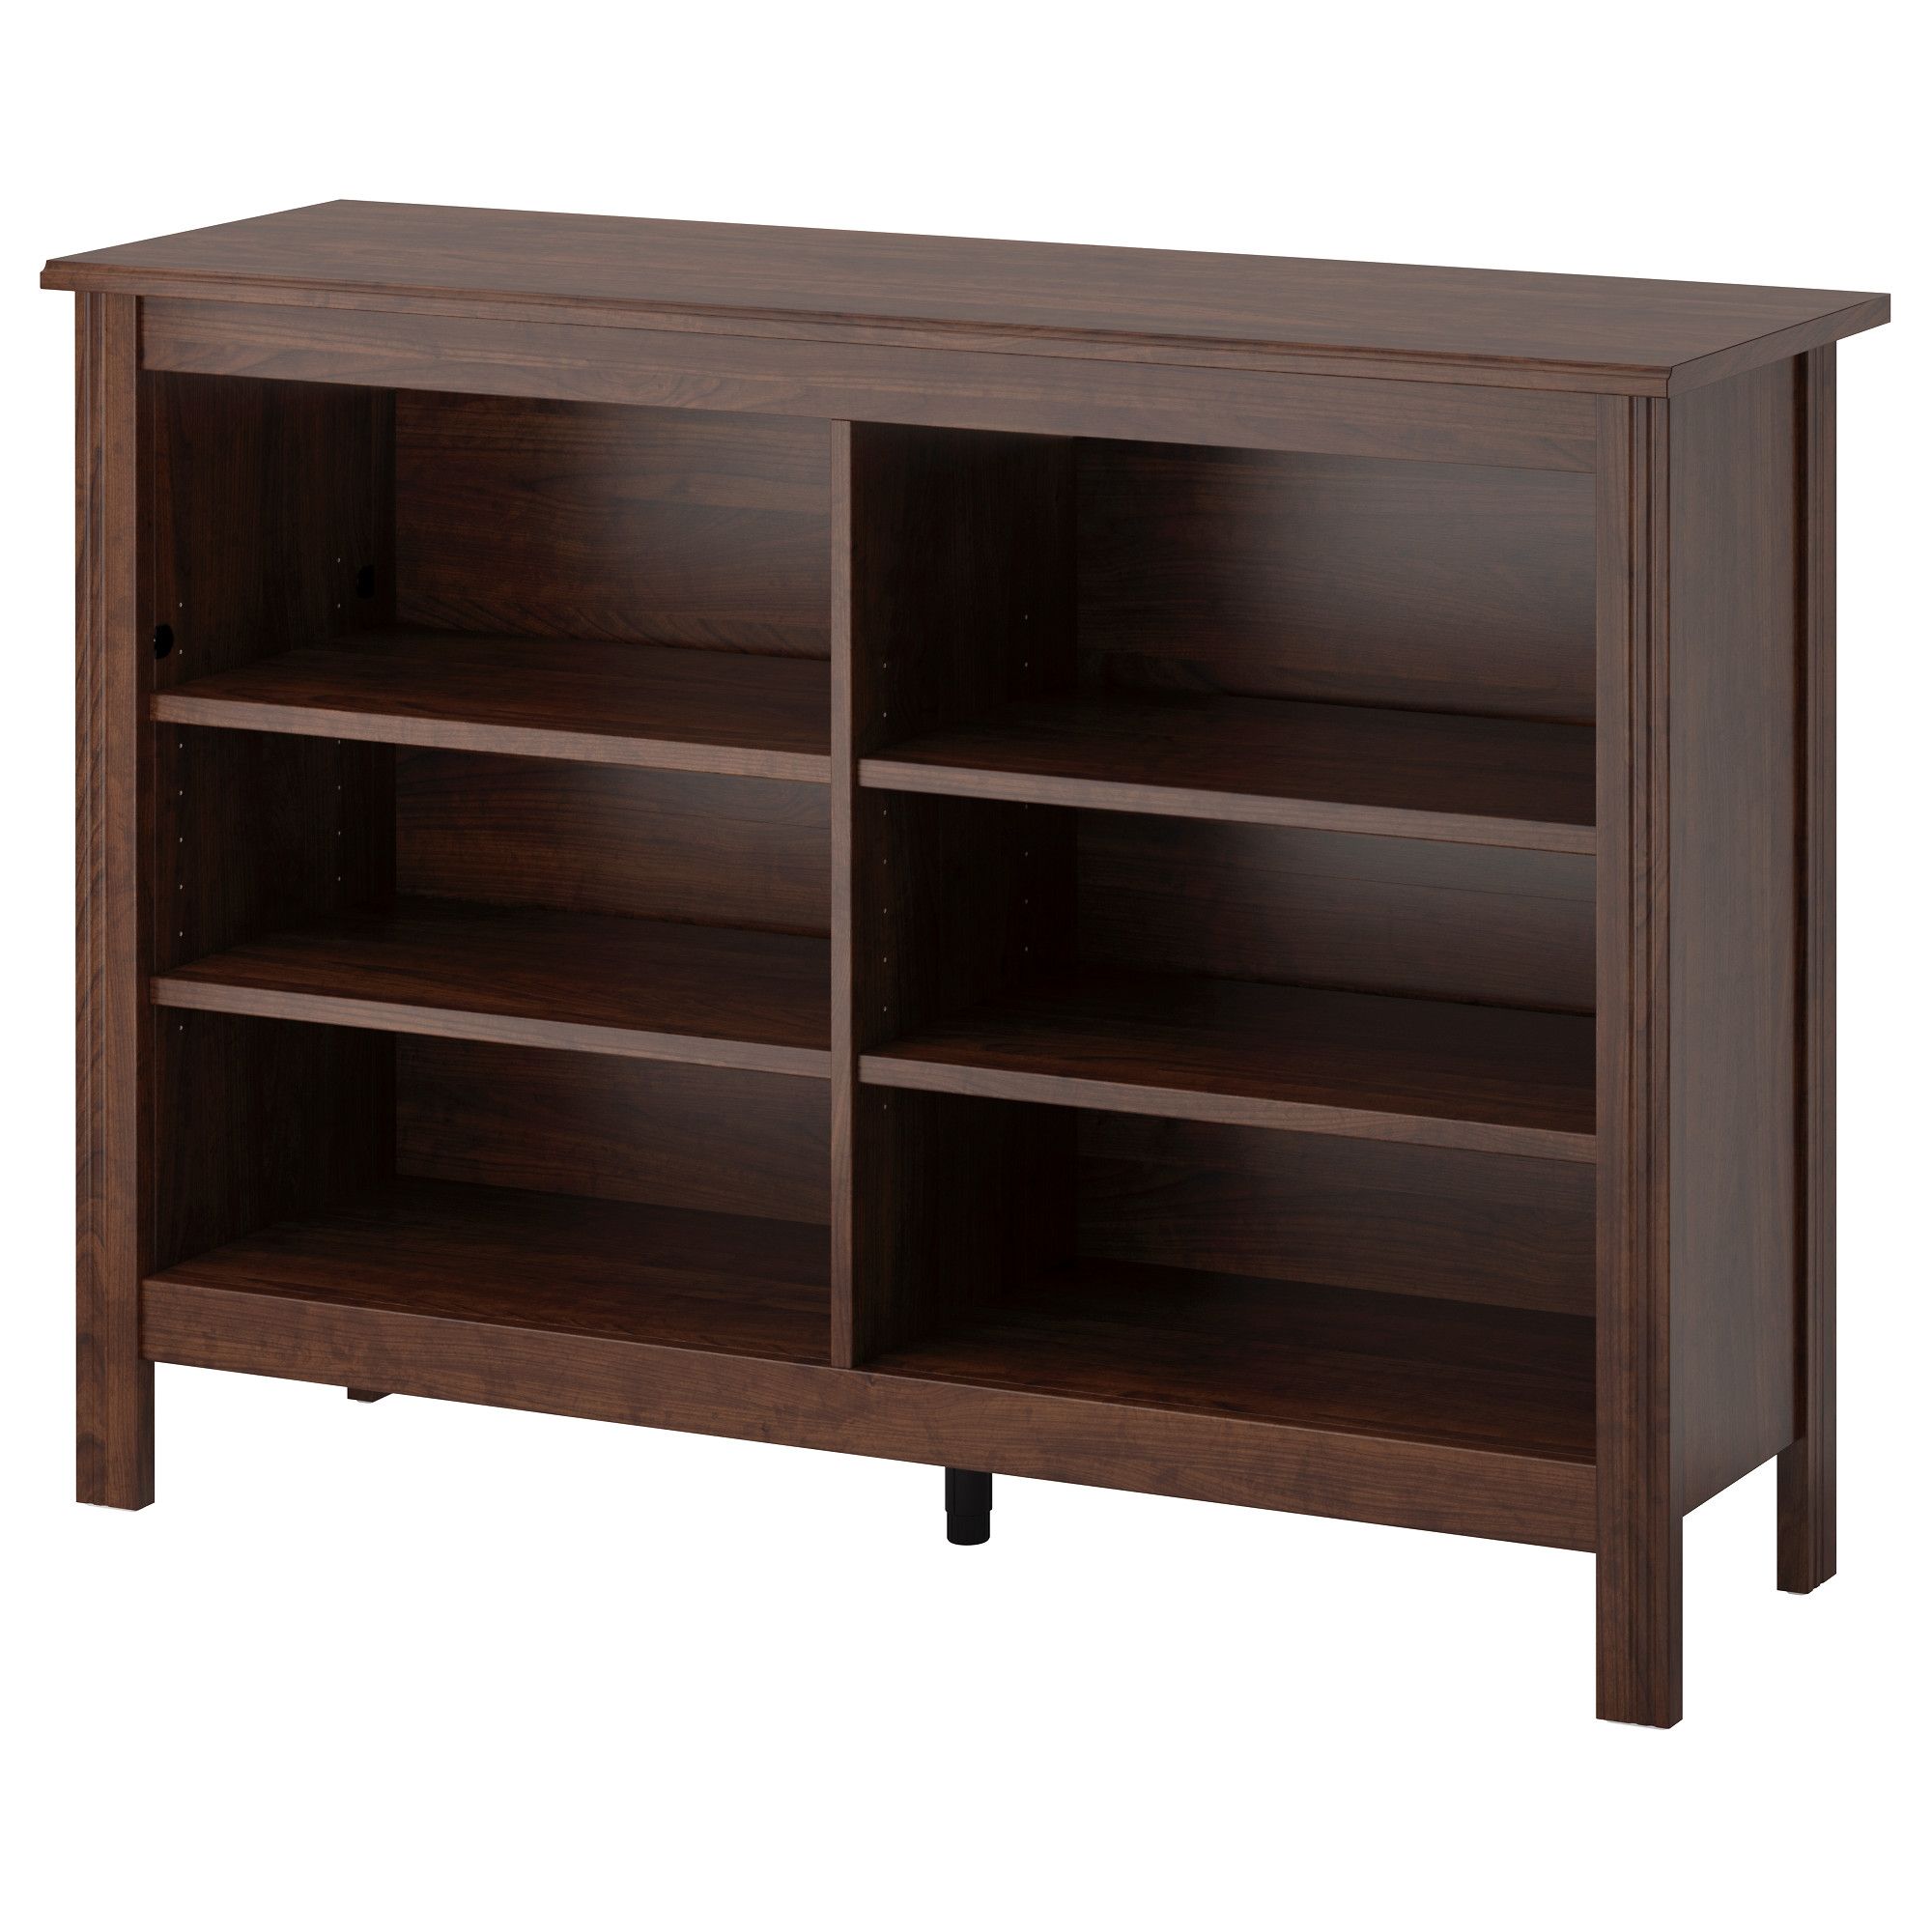 Brusali Tv Unit Brown Ikea For Bookcase Tv Unit (View 15 of 15)